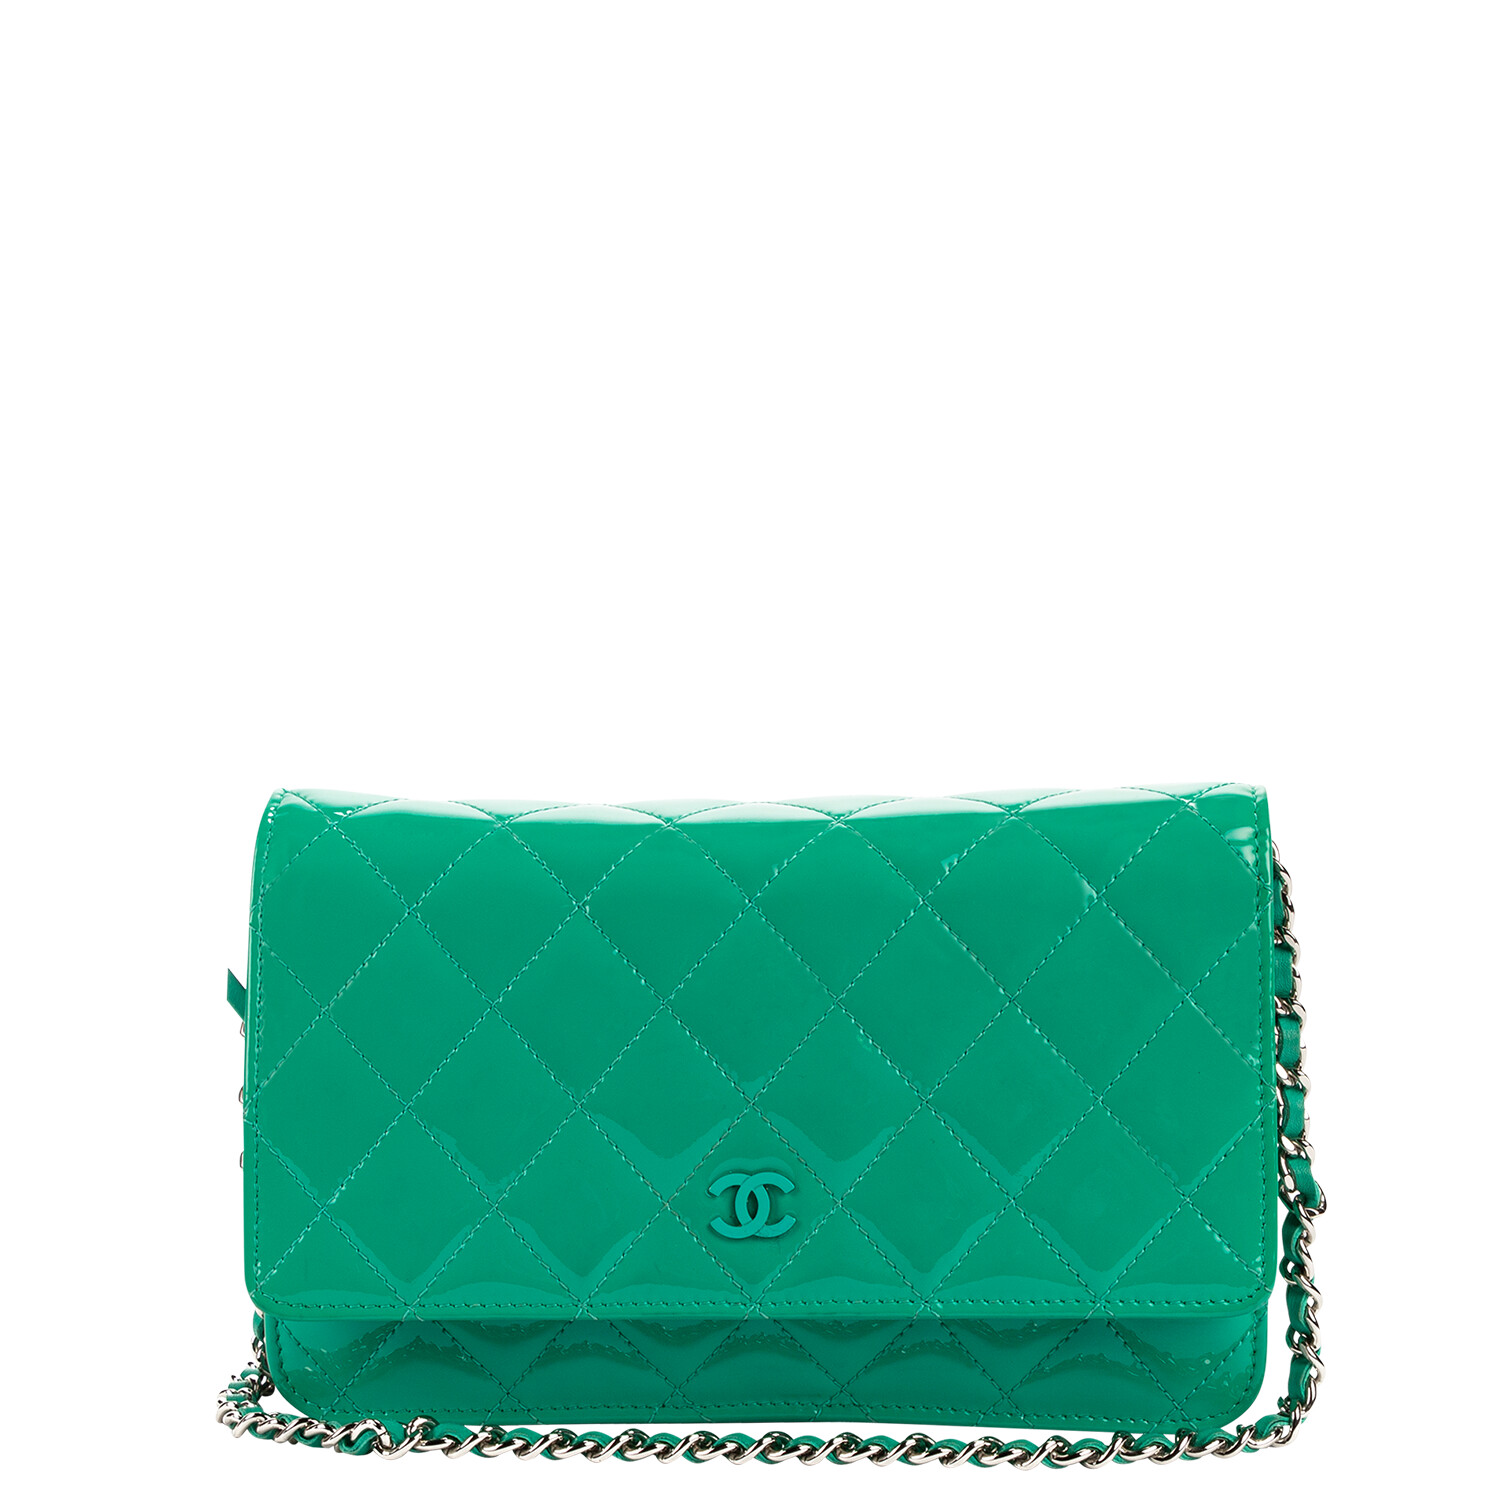 Chanel Cruise 2013 Green Patent Leather WOC